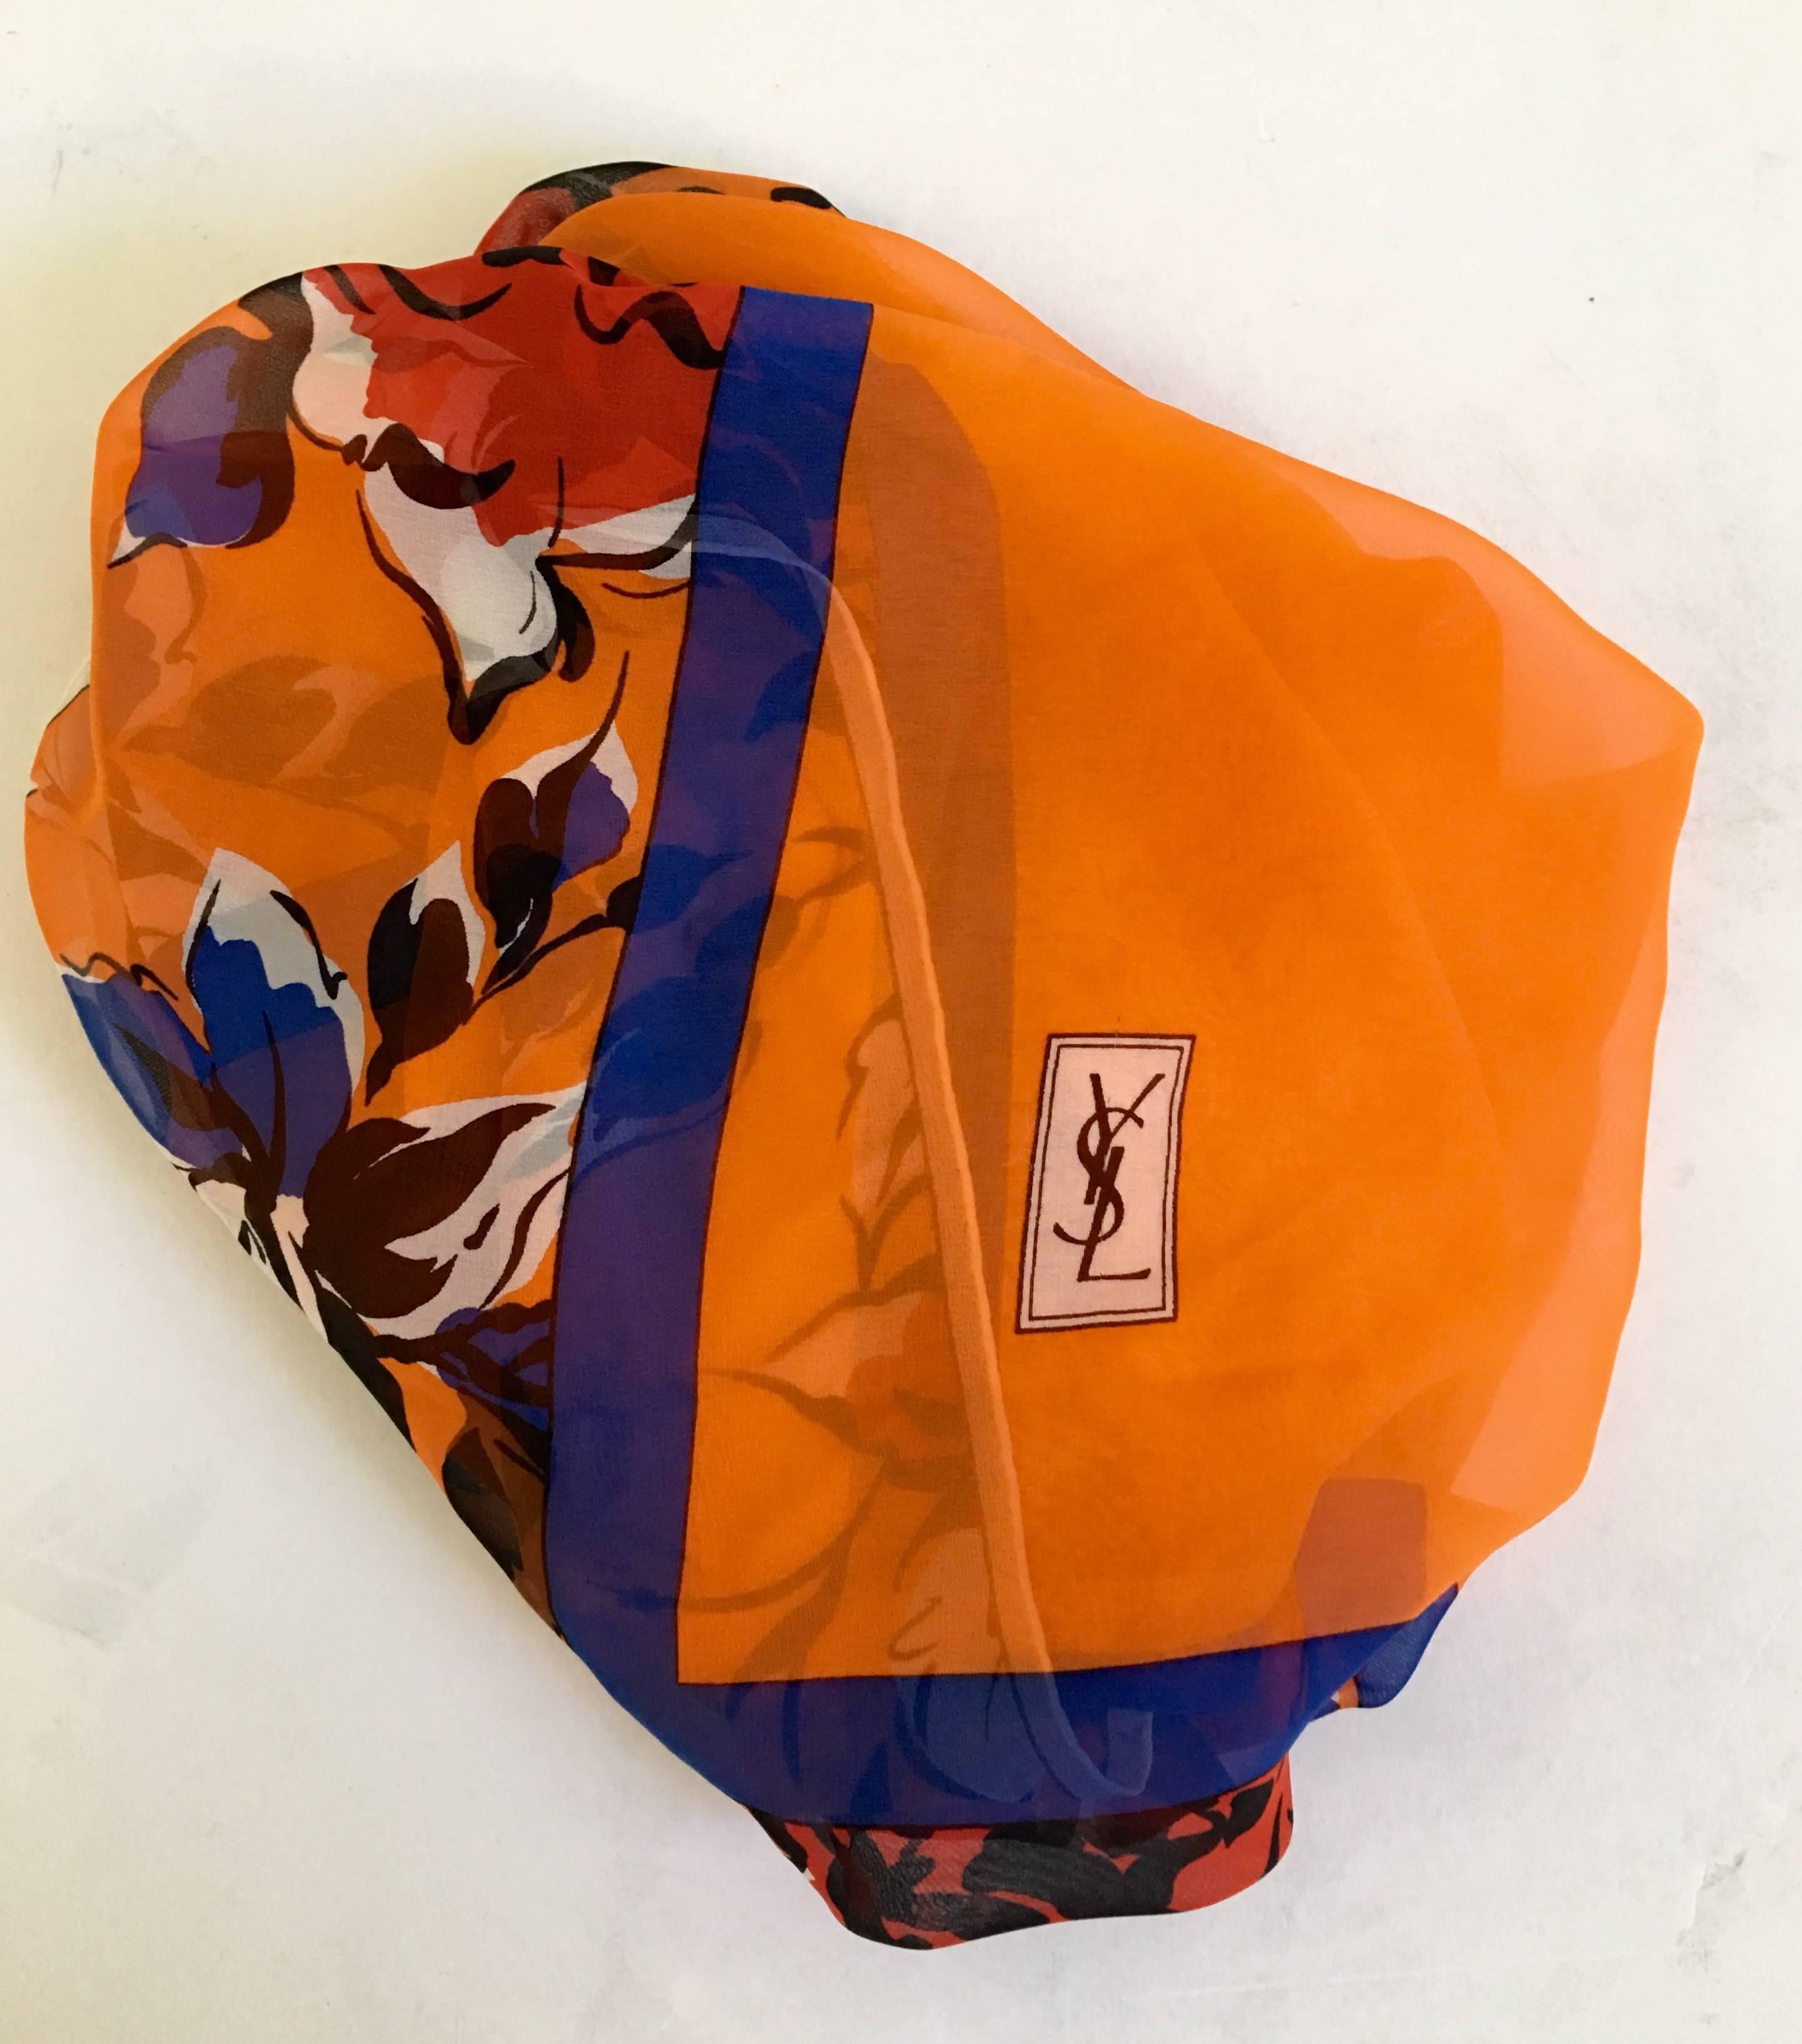 Rare 1970'S Yves Saint Laurent Silk Chiffon silk scarf . Features a ground of vibrant orange with electric blue, red, white and black floral motif border. Hand rolled edge detail, 34